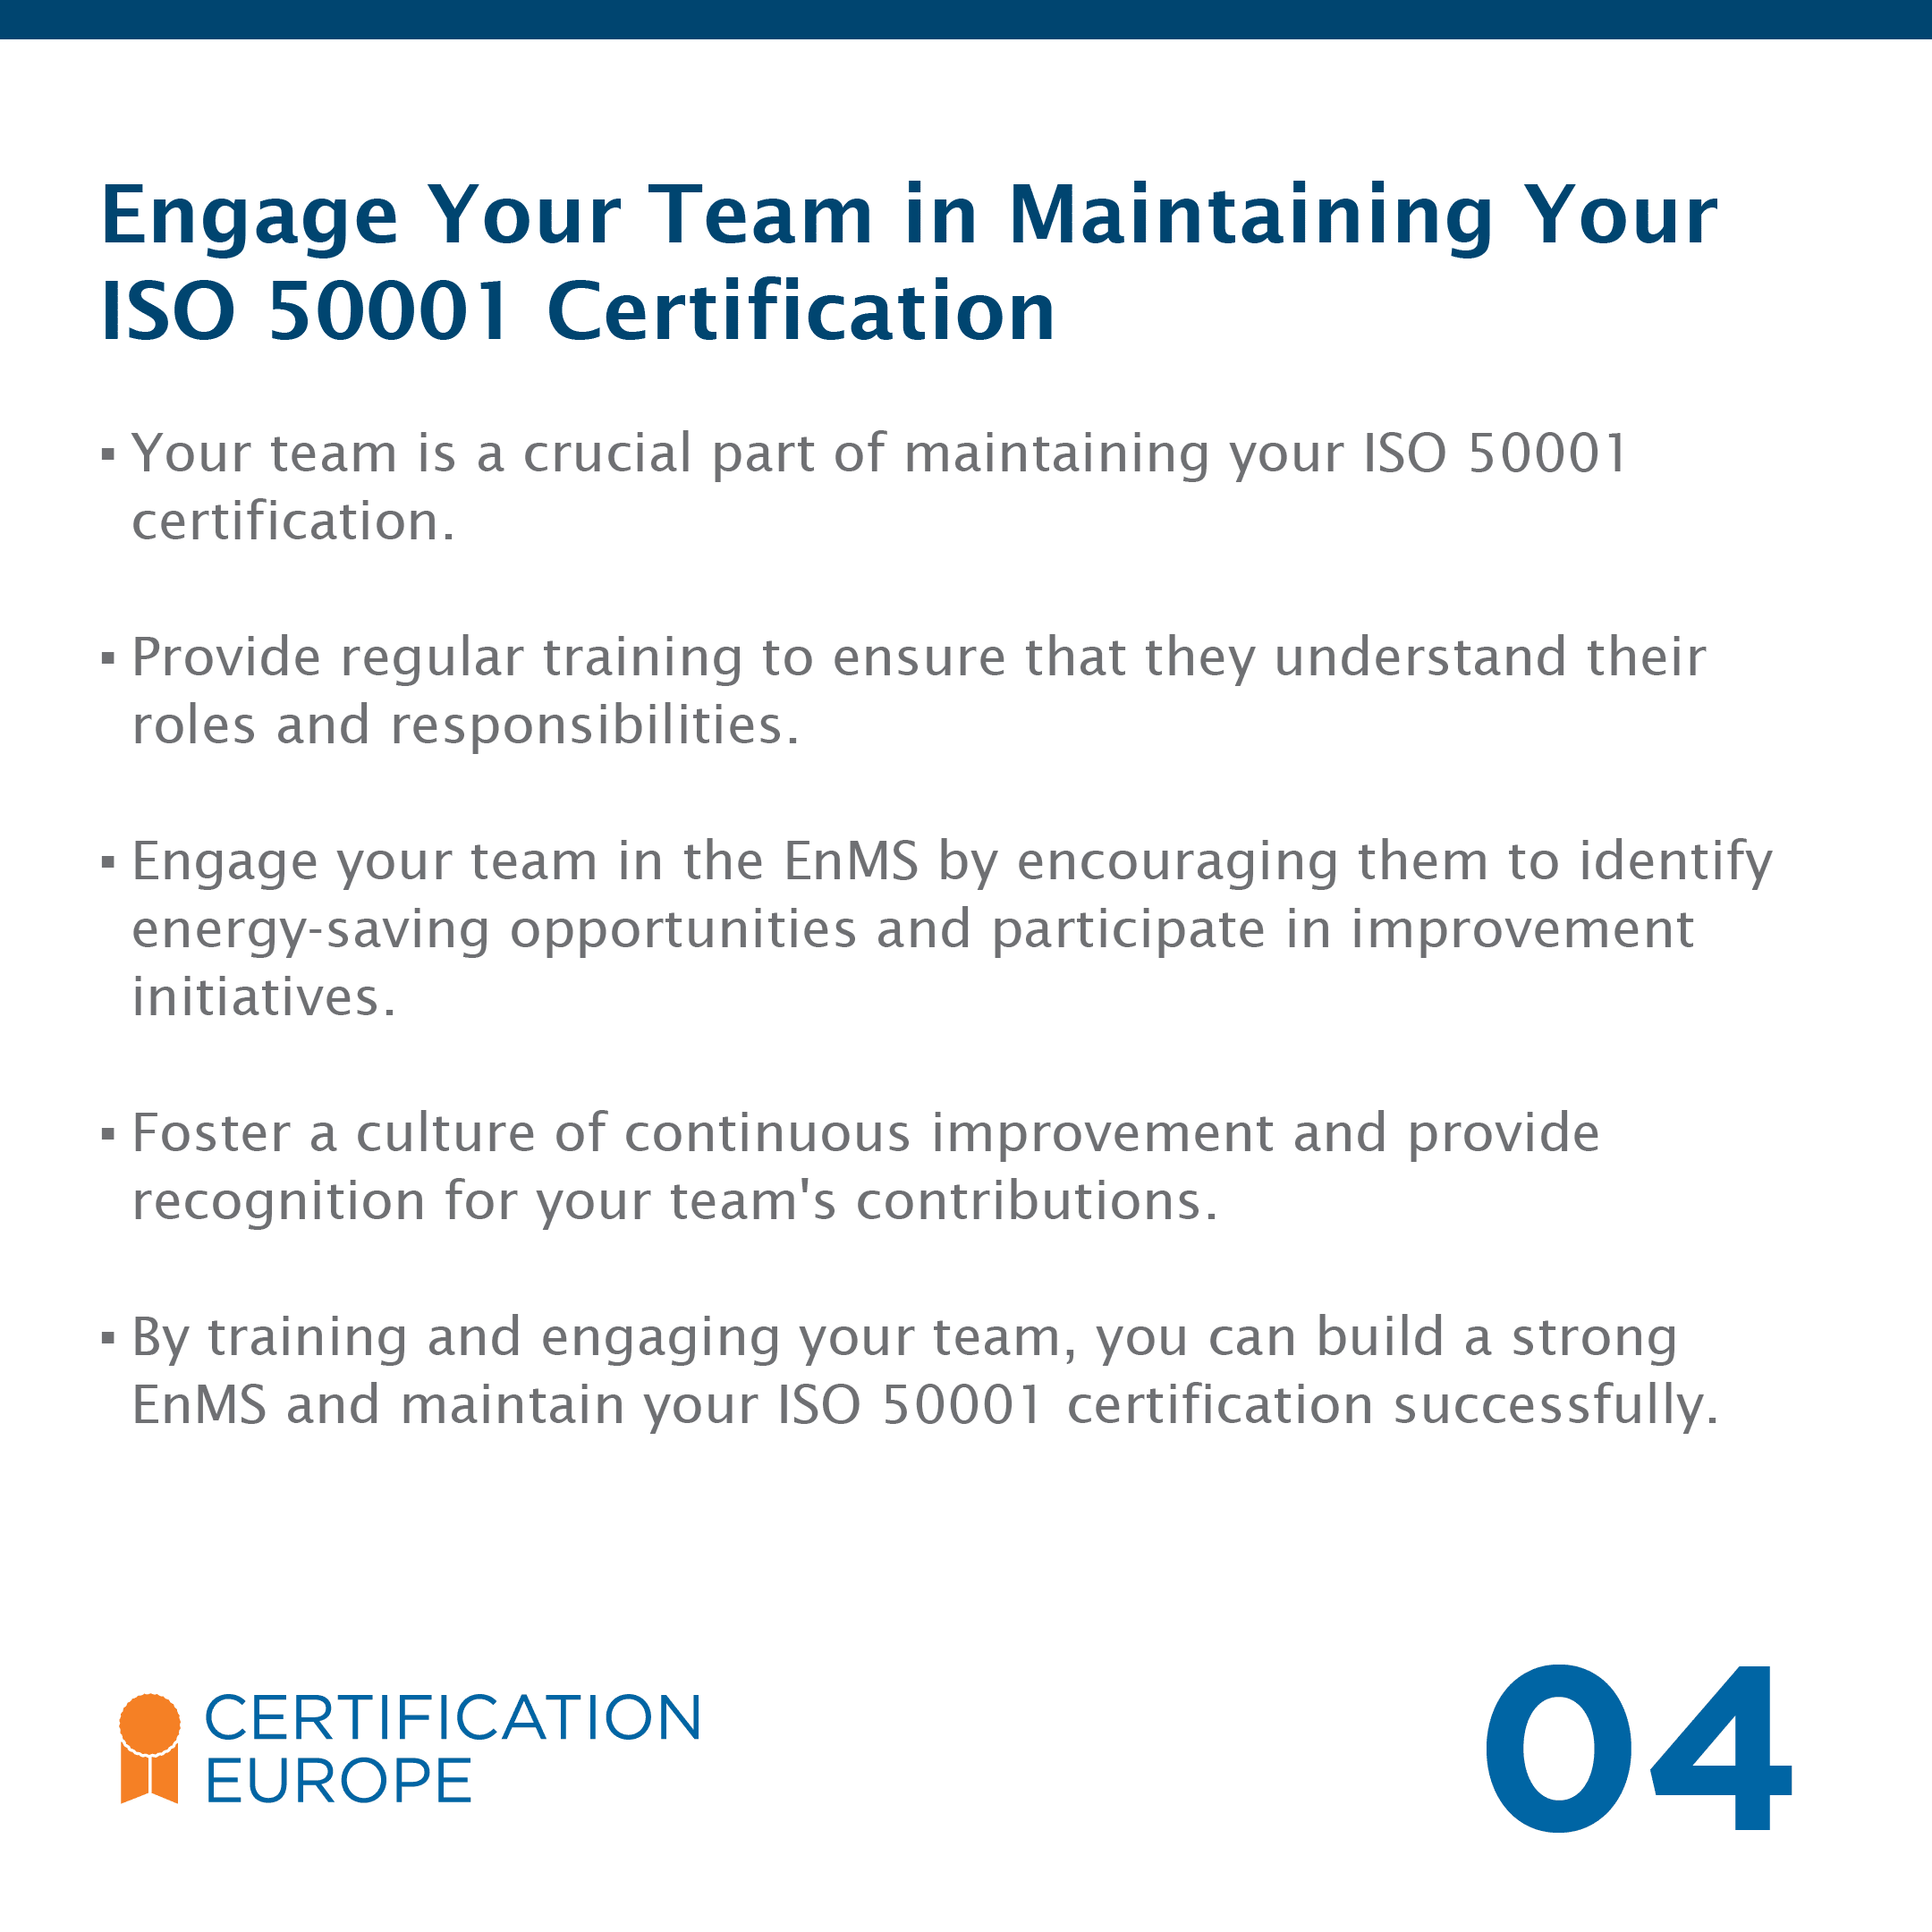 Ways to successfully maintain your ISO 50001 Certification - 4